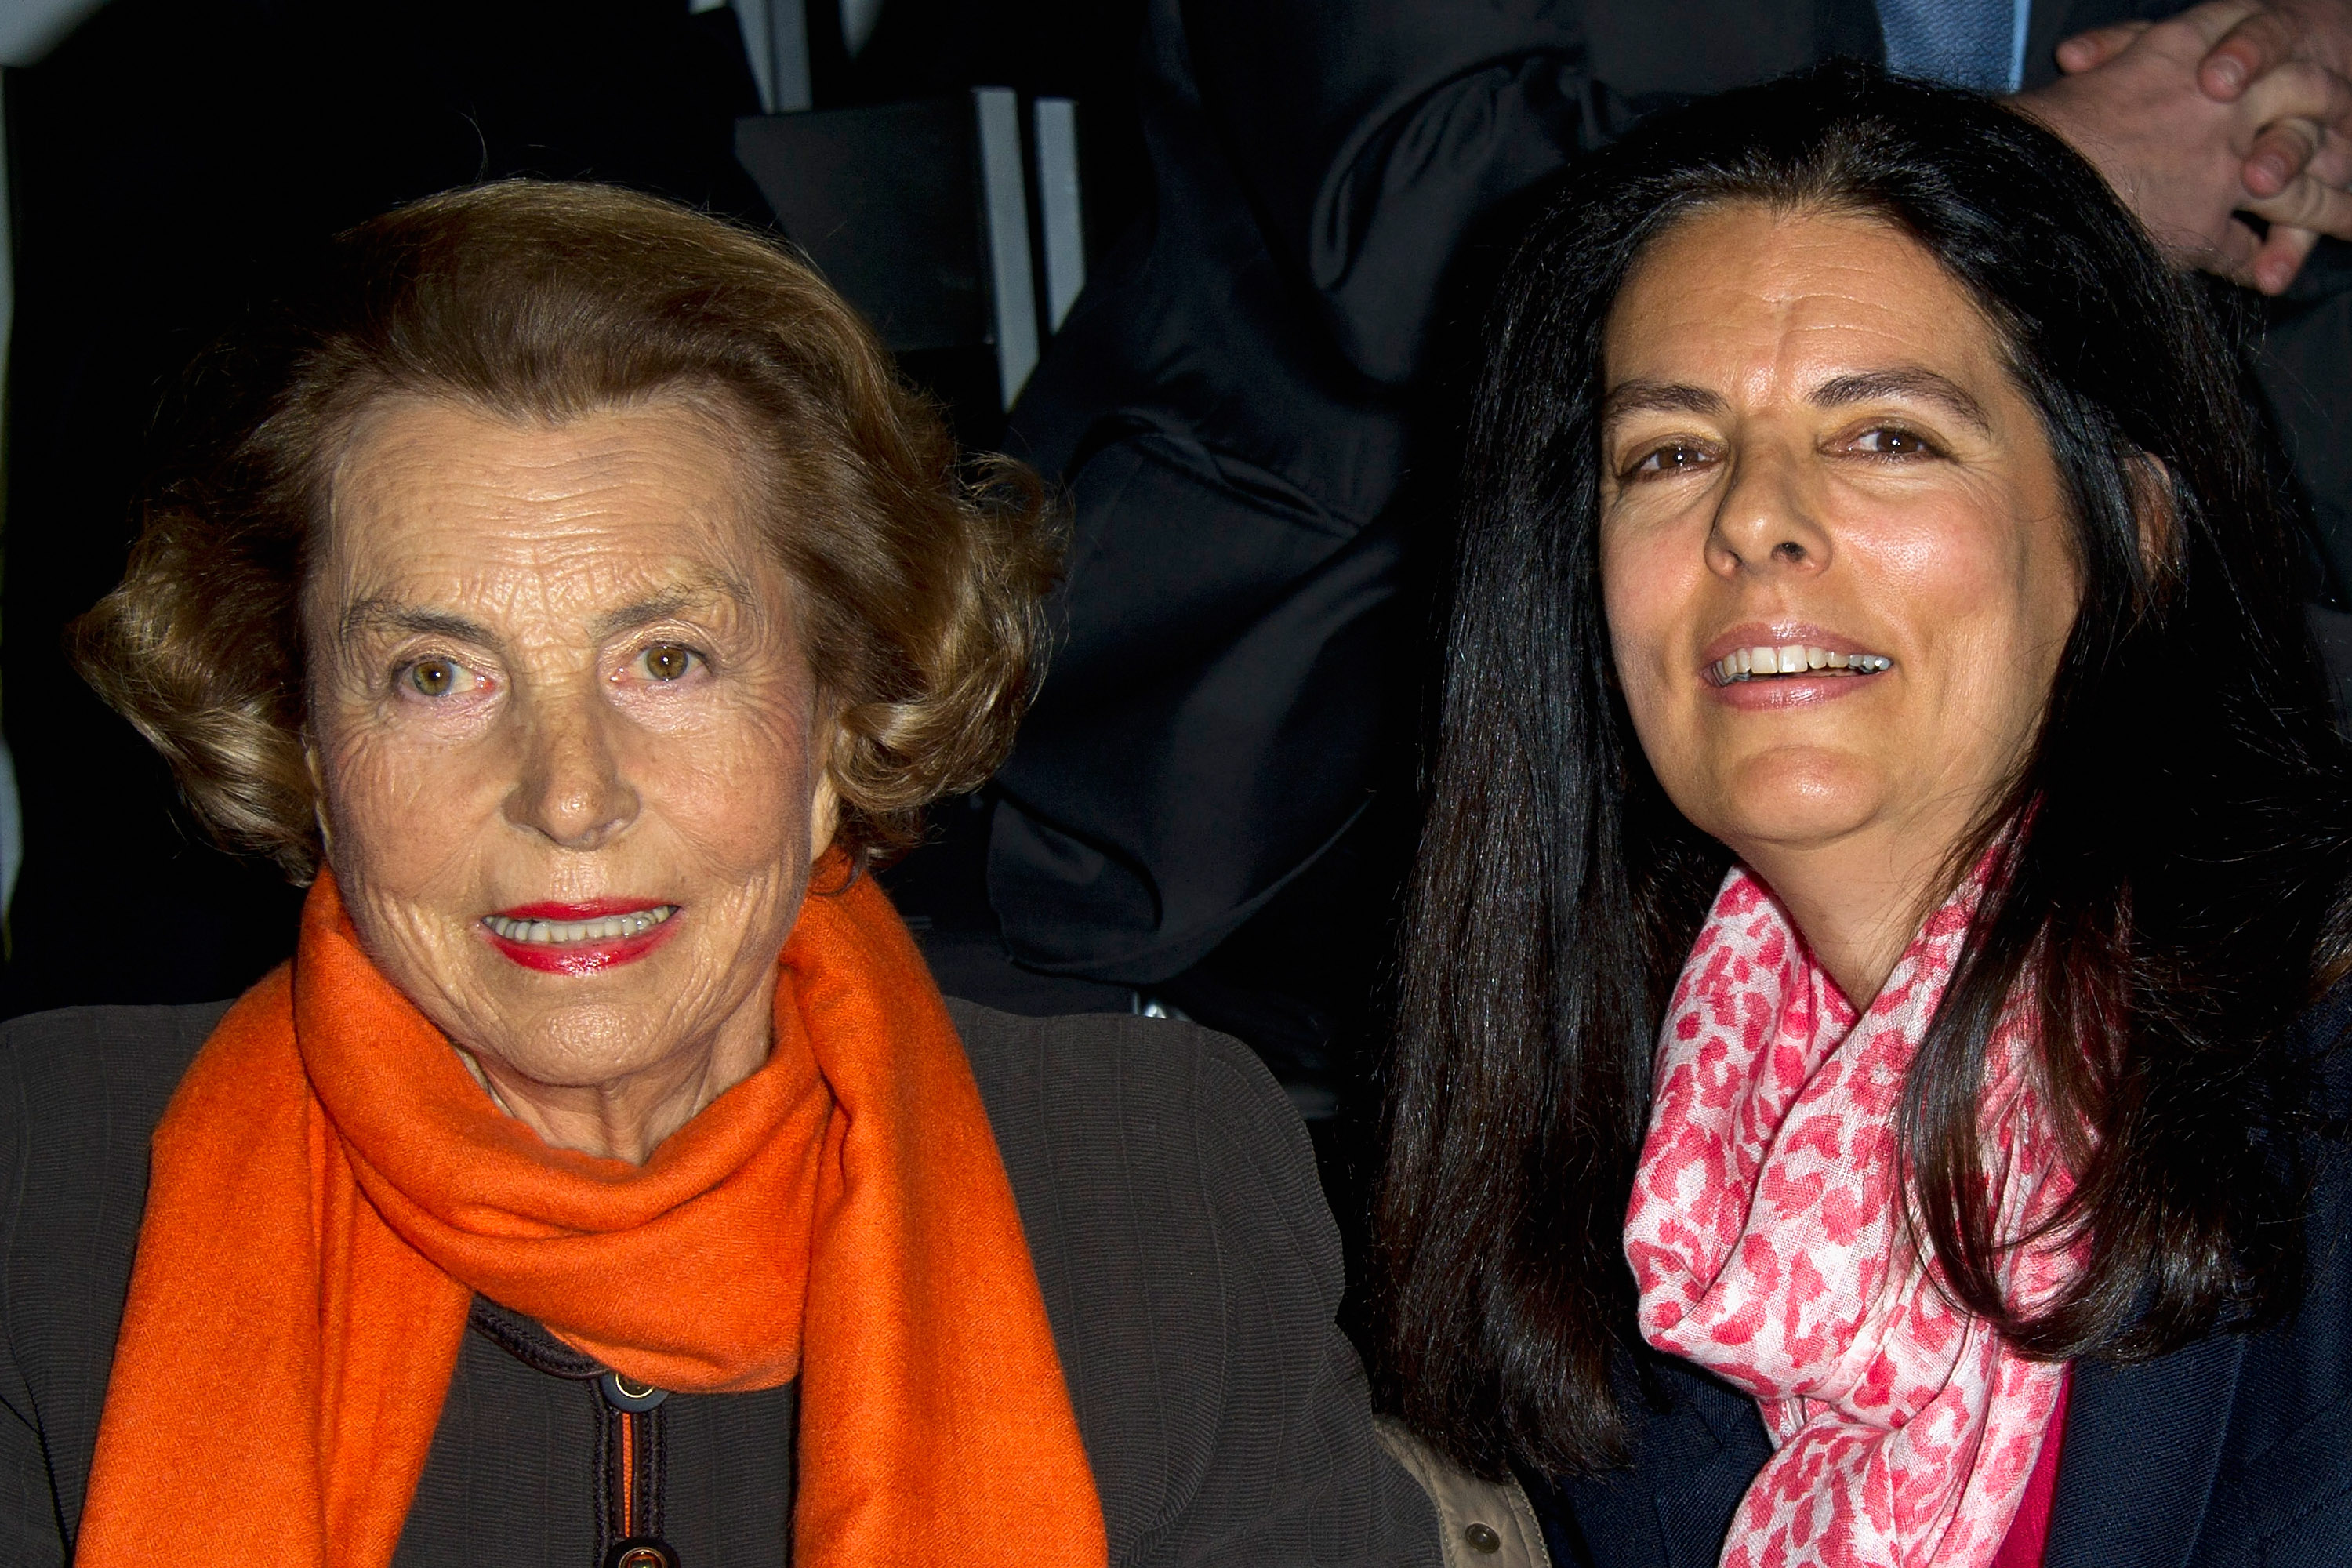 Lilian Bettencourt and Françoise Bettencourt Meyers at Paris Fashion Week in Paris, France on January 24, 2012 | Source: Getty Images